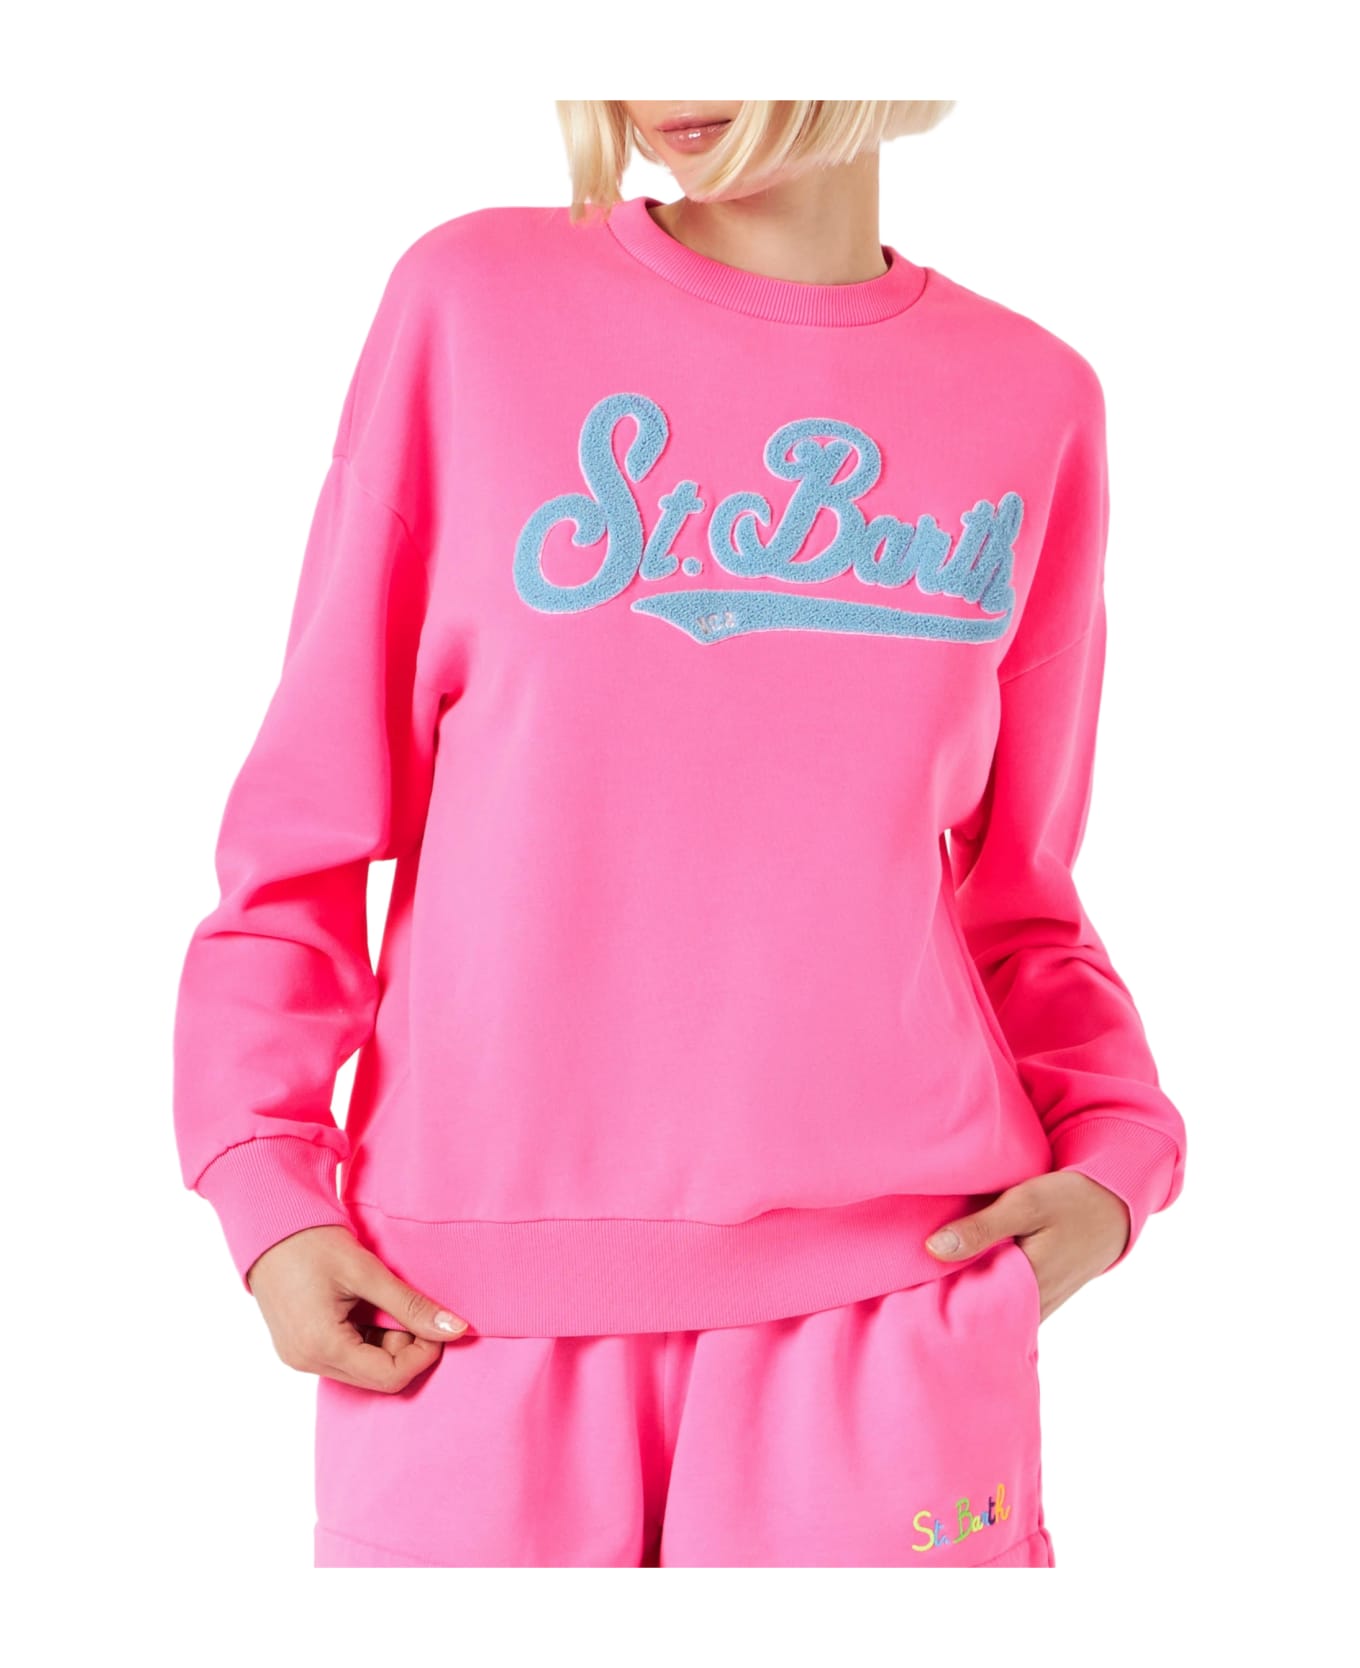 MC2 Saint Barth Woman Fluo Pink Sweatshirt With St. Barth Embroidery - PINK